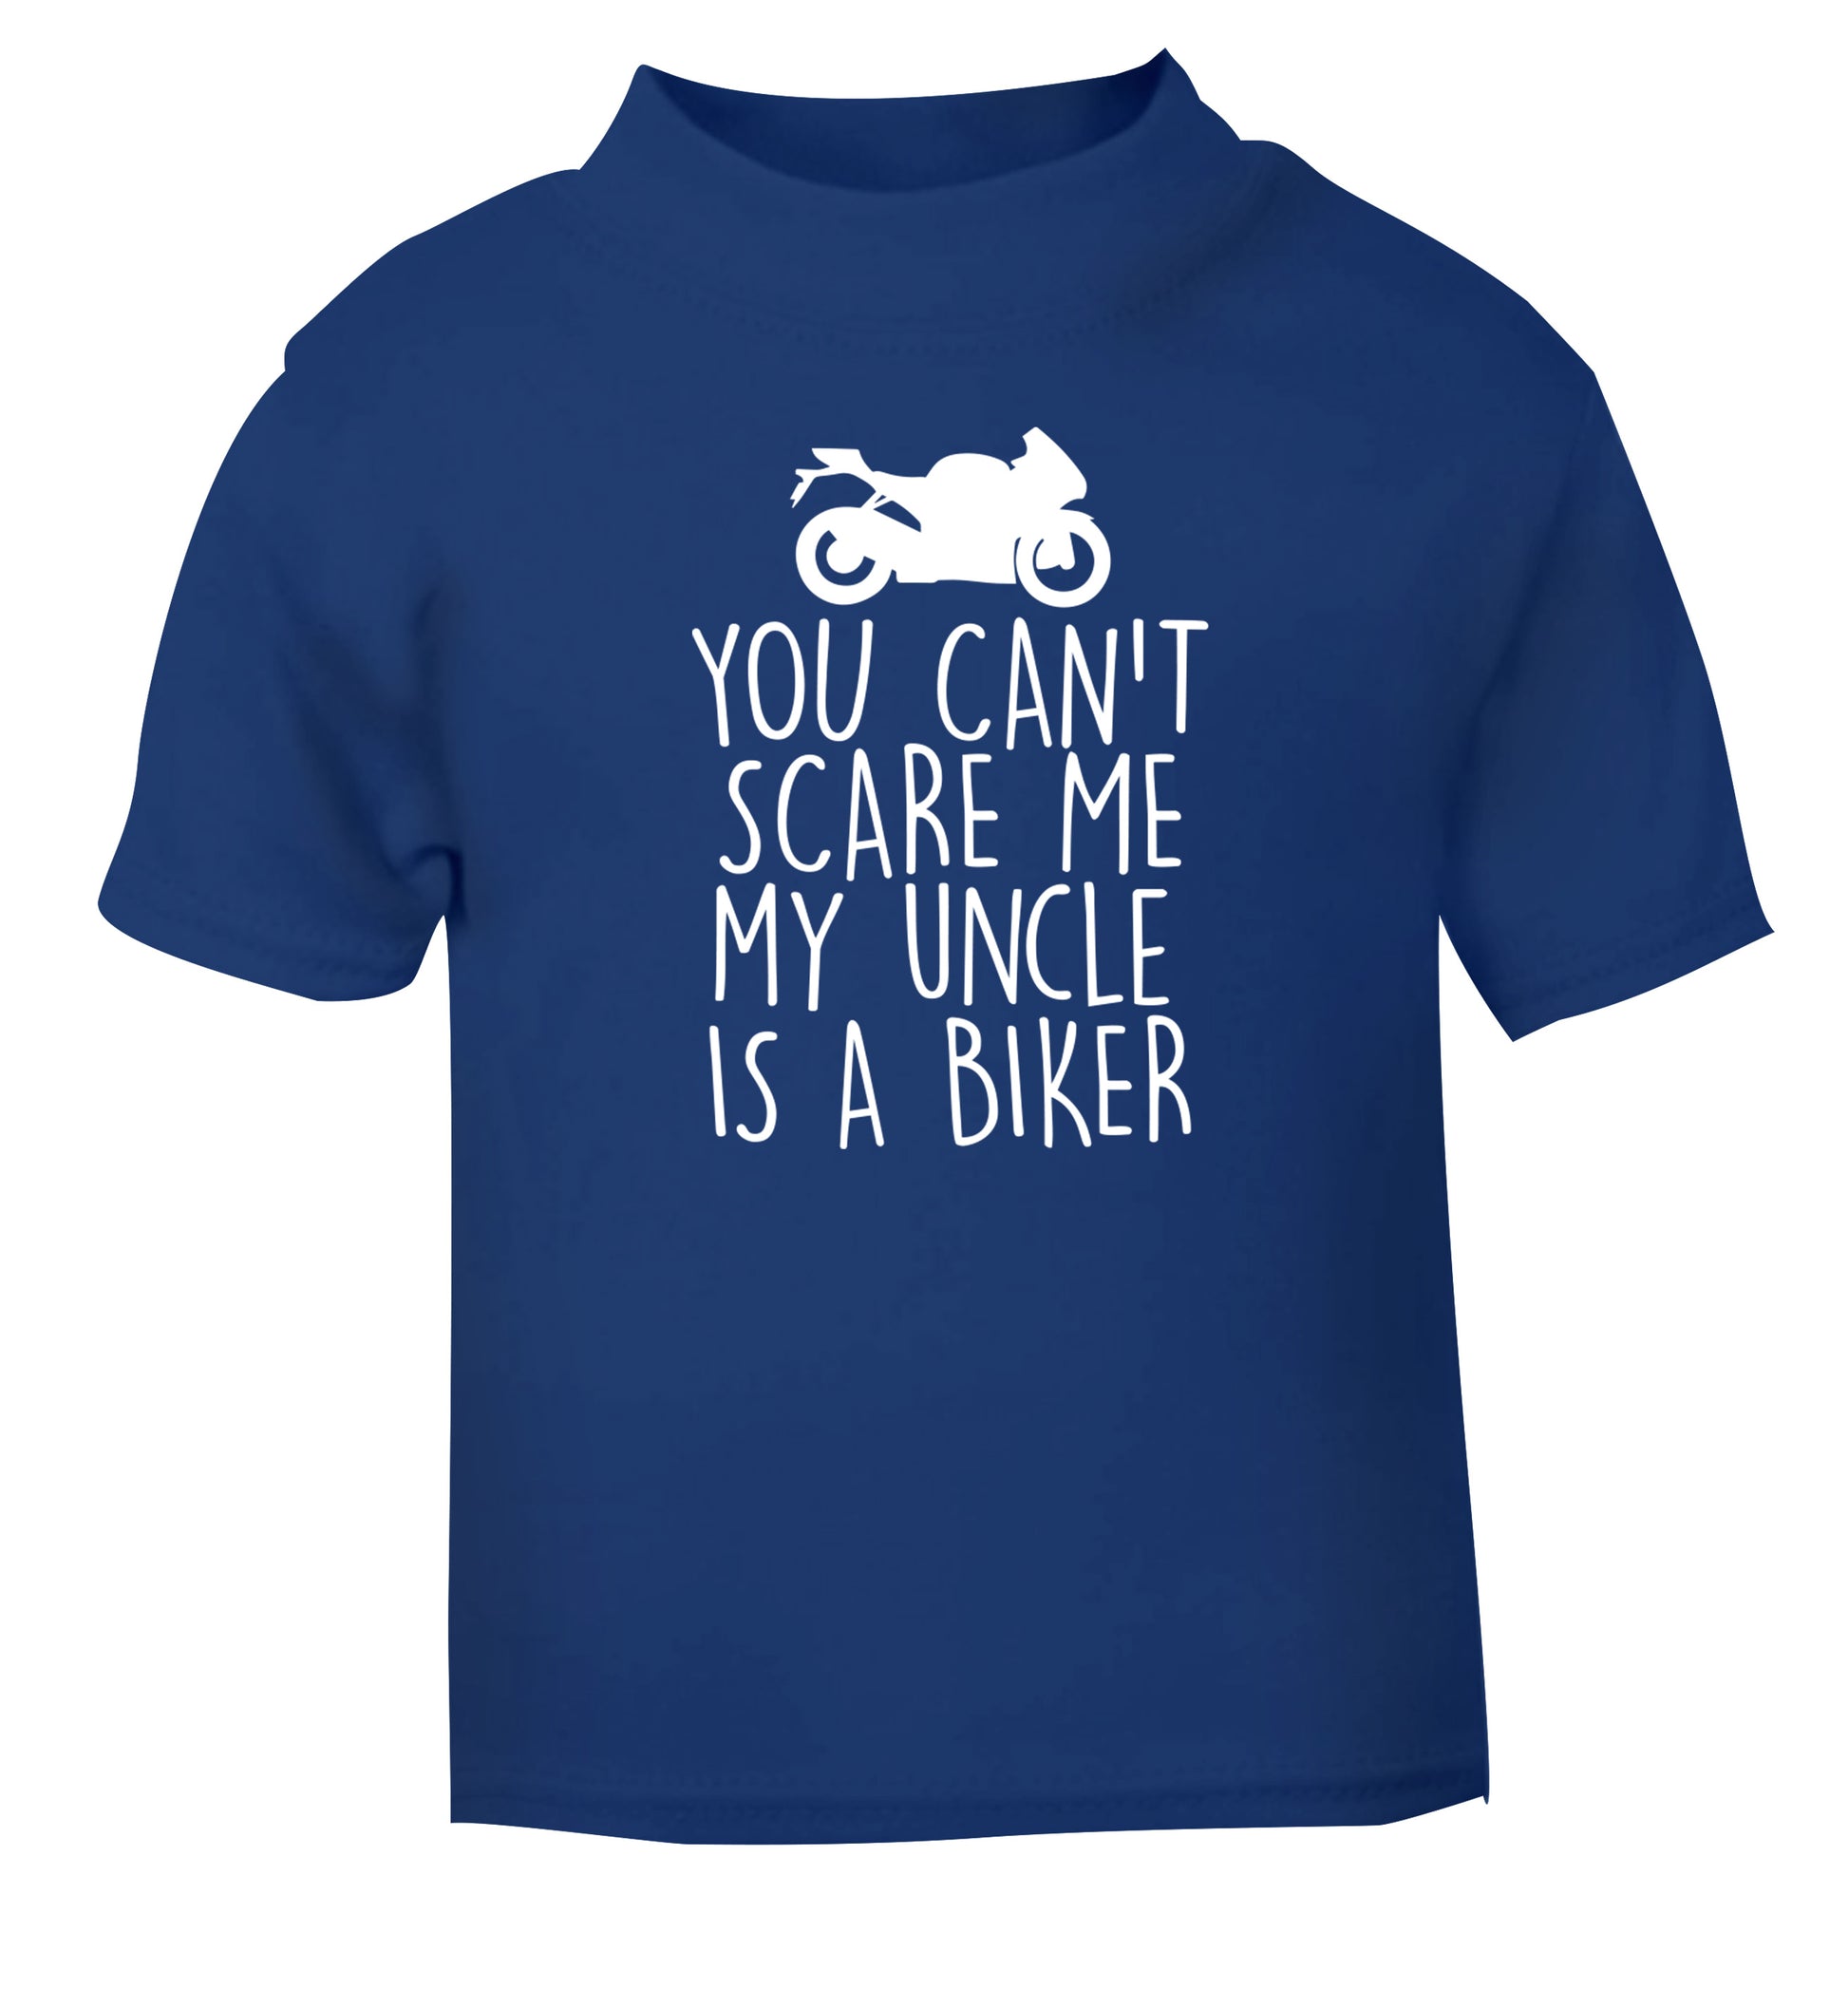 You can't scare me my uncle is a biker blue Baby Toddler Tshirt 2 Years